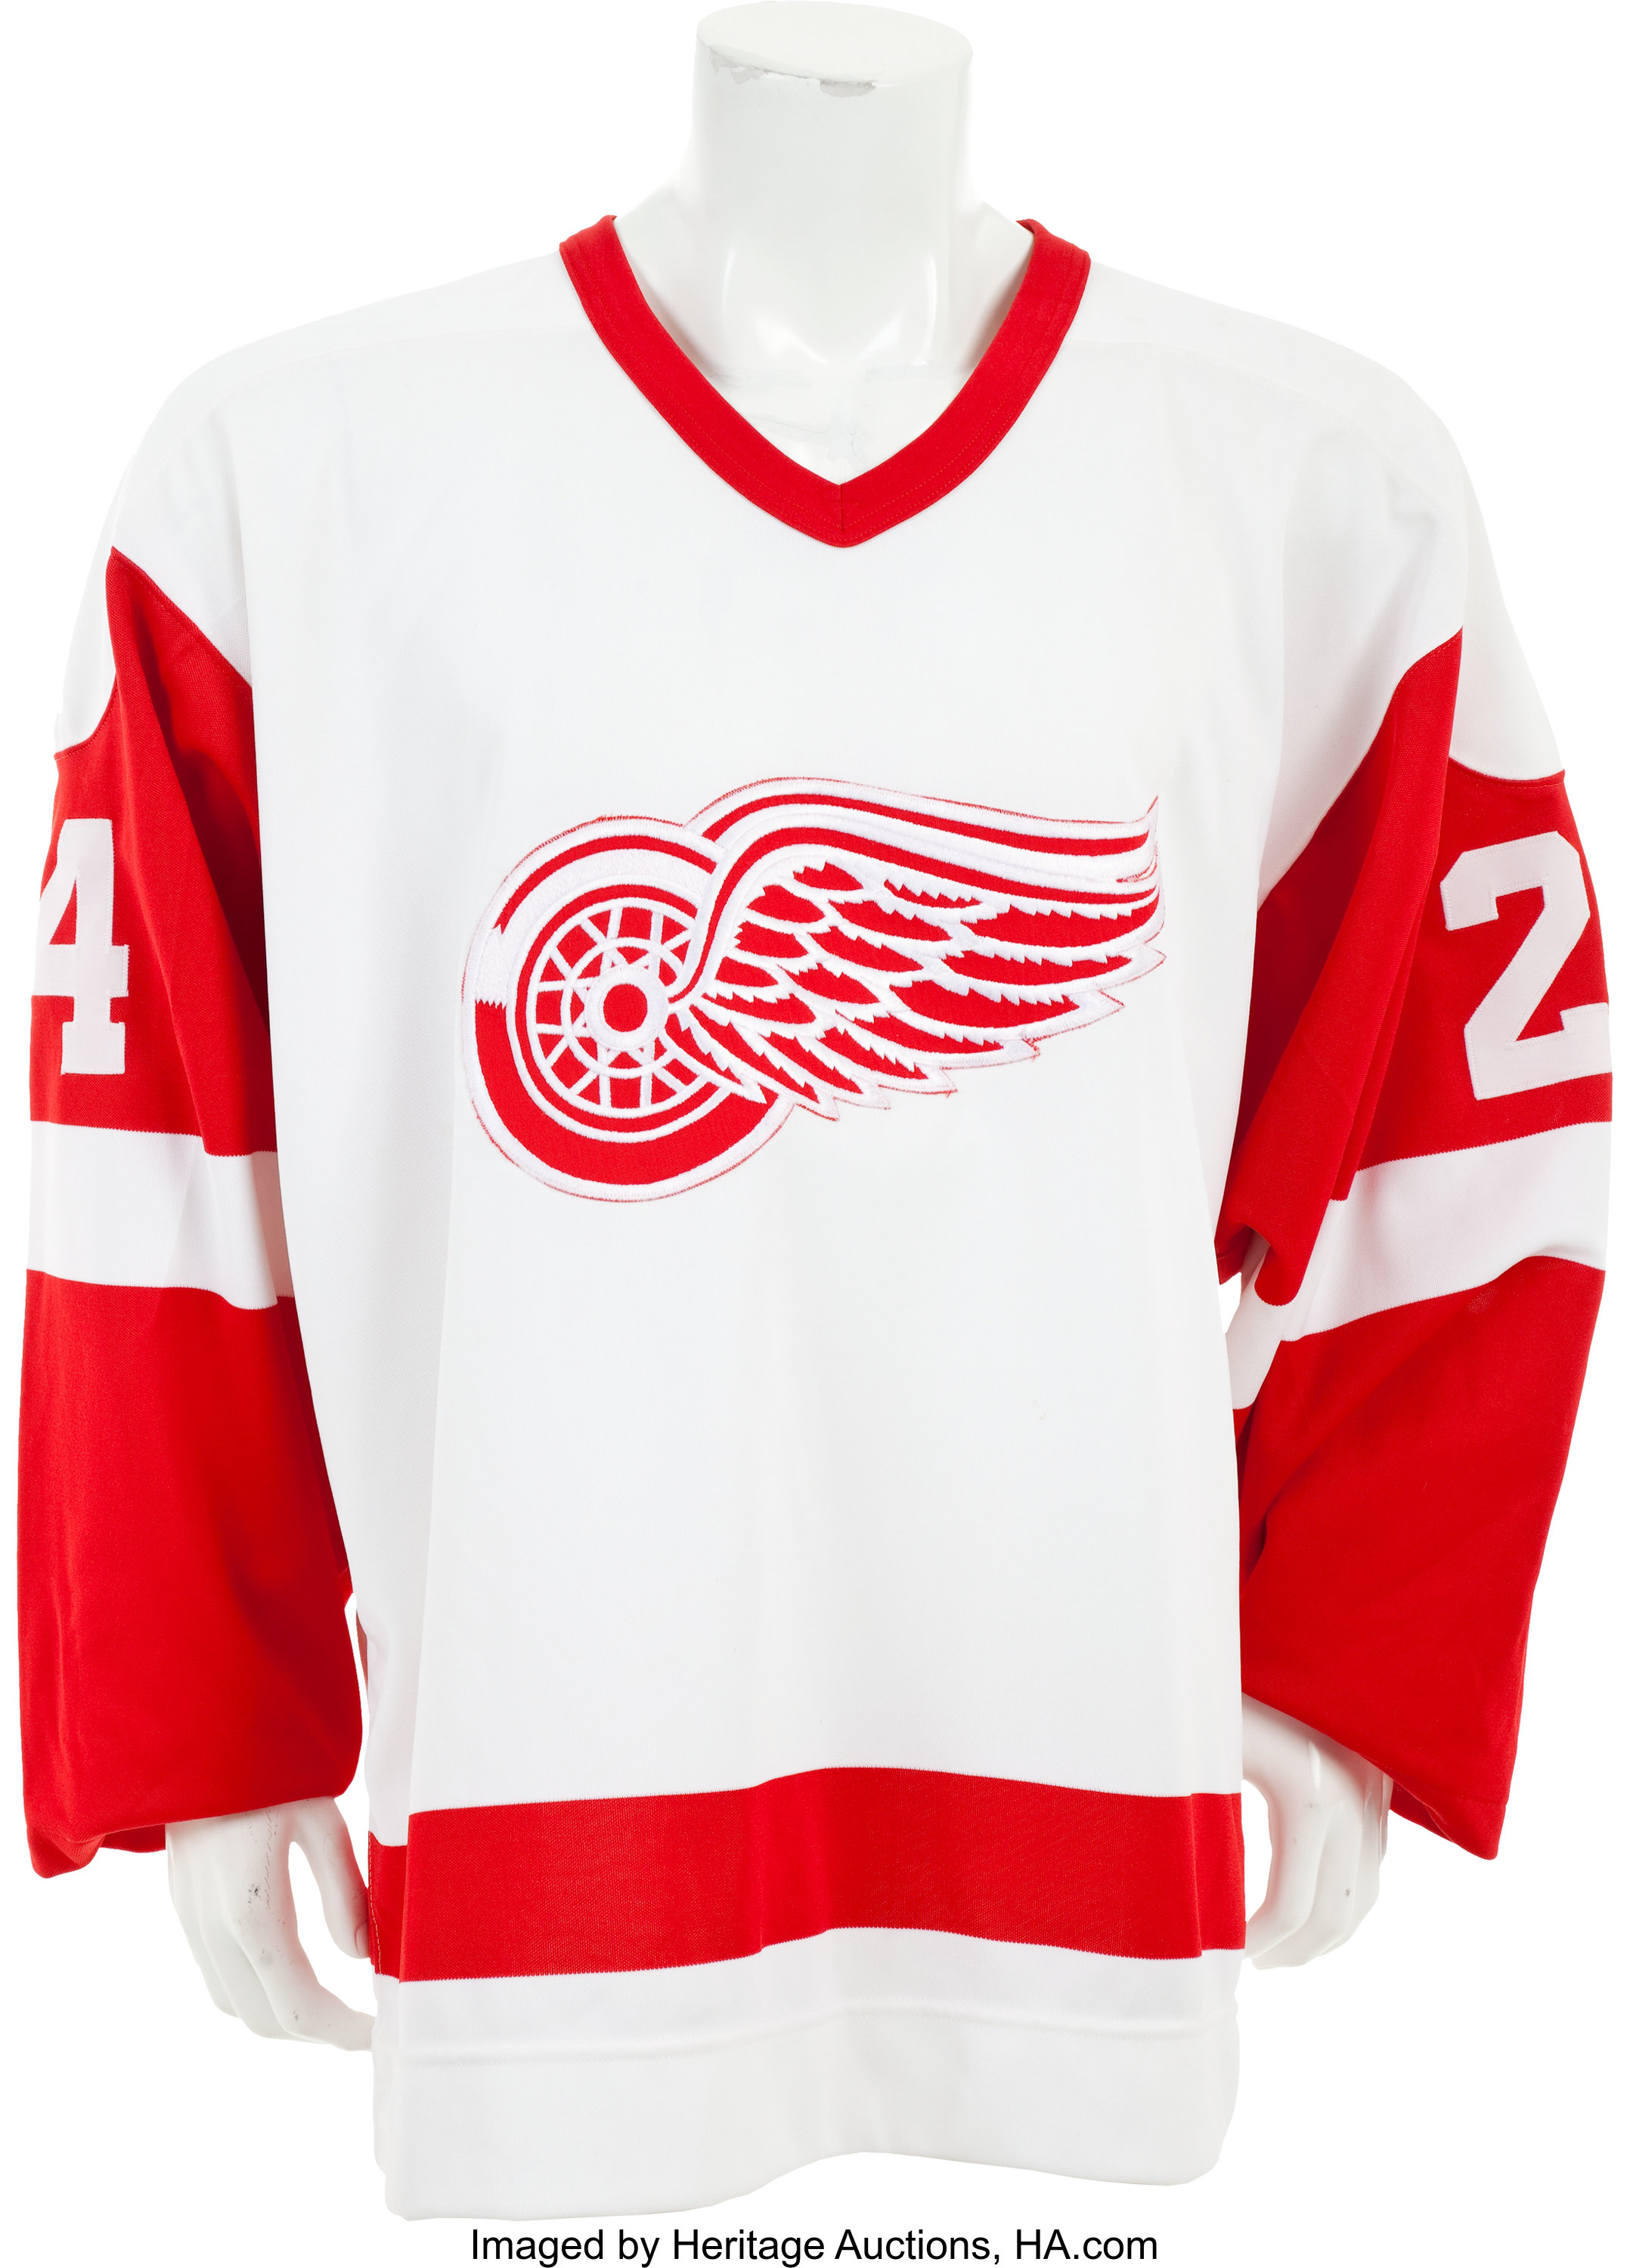 BOB PROBERT AUTHENTIC PRO 1980s DETROIT RED WINGS JERSEY - Not Game Worn